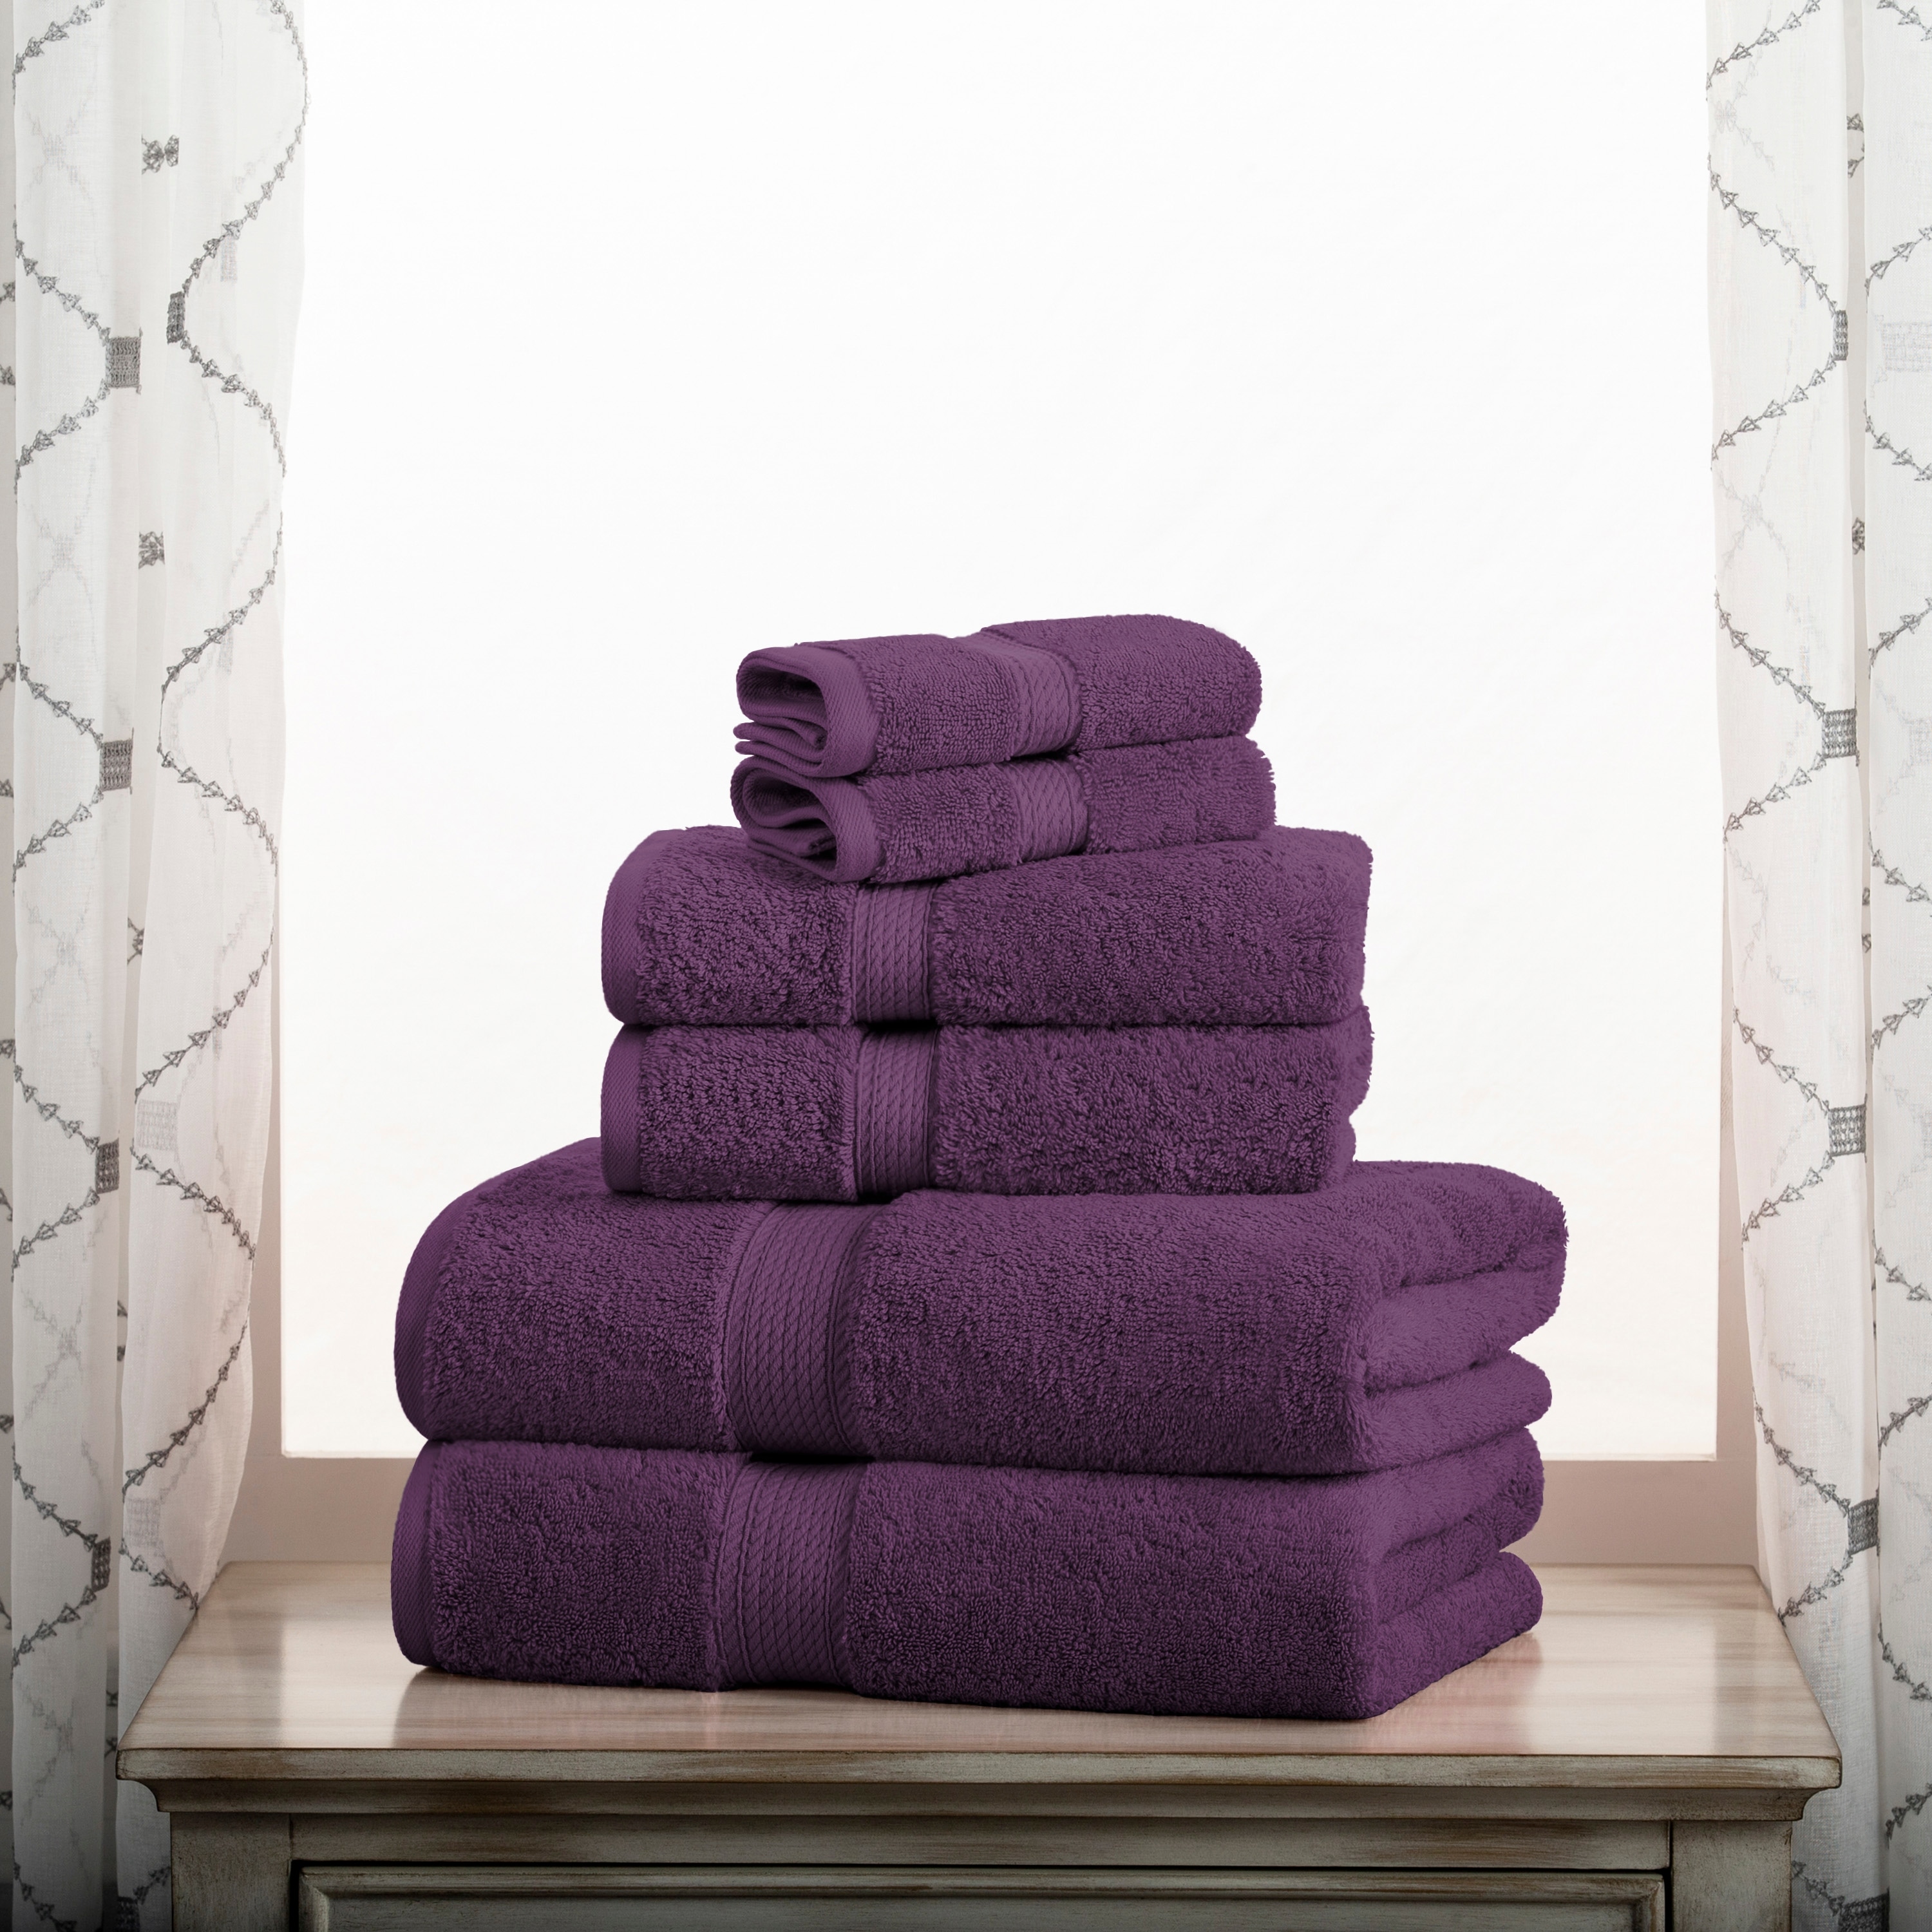 https://ak1.ostkcdn.com/images/products/is/images/direct/51a139138d70afd45b7e9076ad4de1c6012f8730/Egyptian-Cotton-Heavyweight-Solid-Plush-Towel-Set-by-Superior.jpg